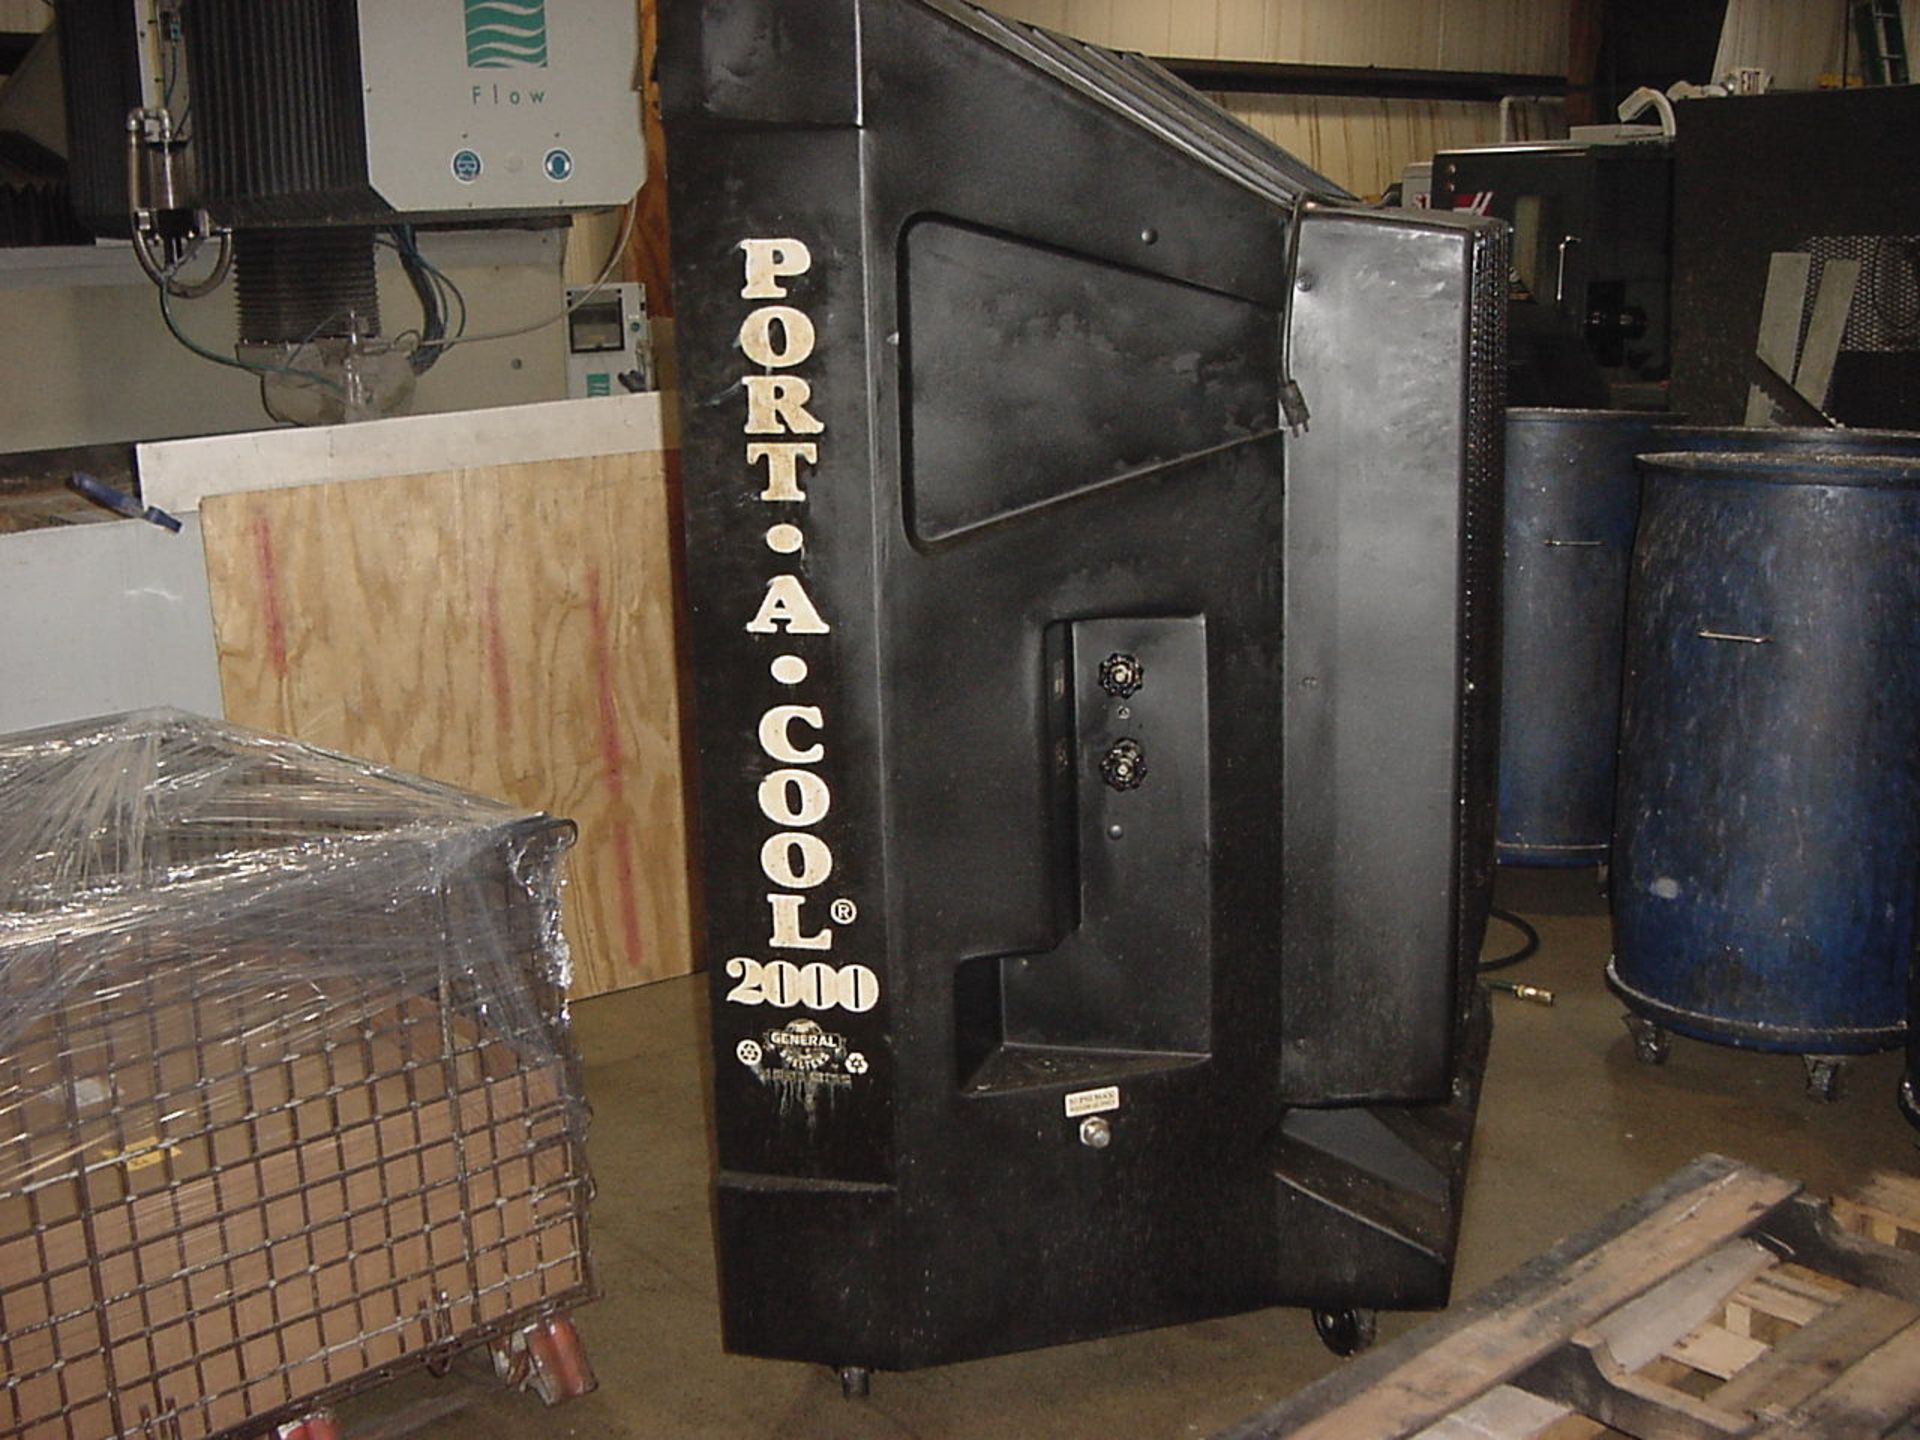 Port A Cool 2000 Evaporative Cooler (LOCATED IN CORRY, PA) - Image 4 of 4